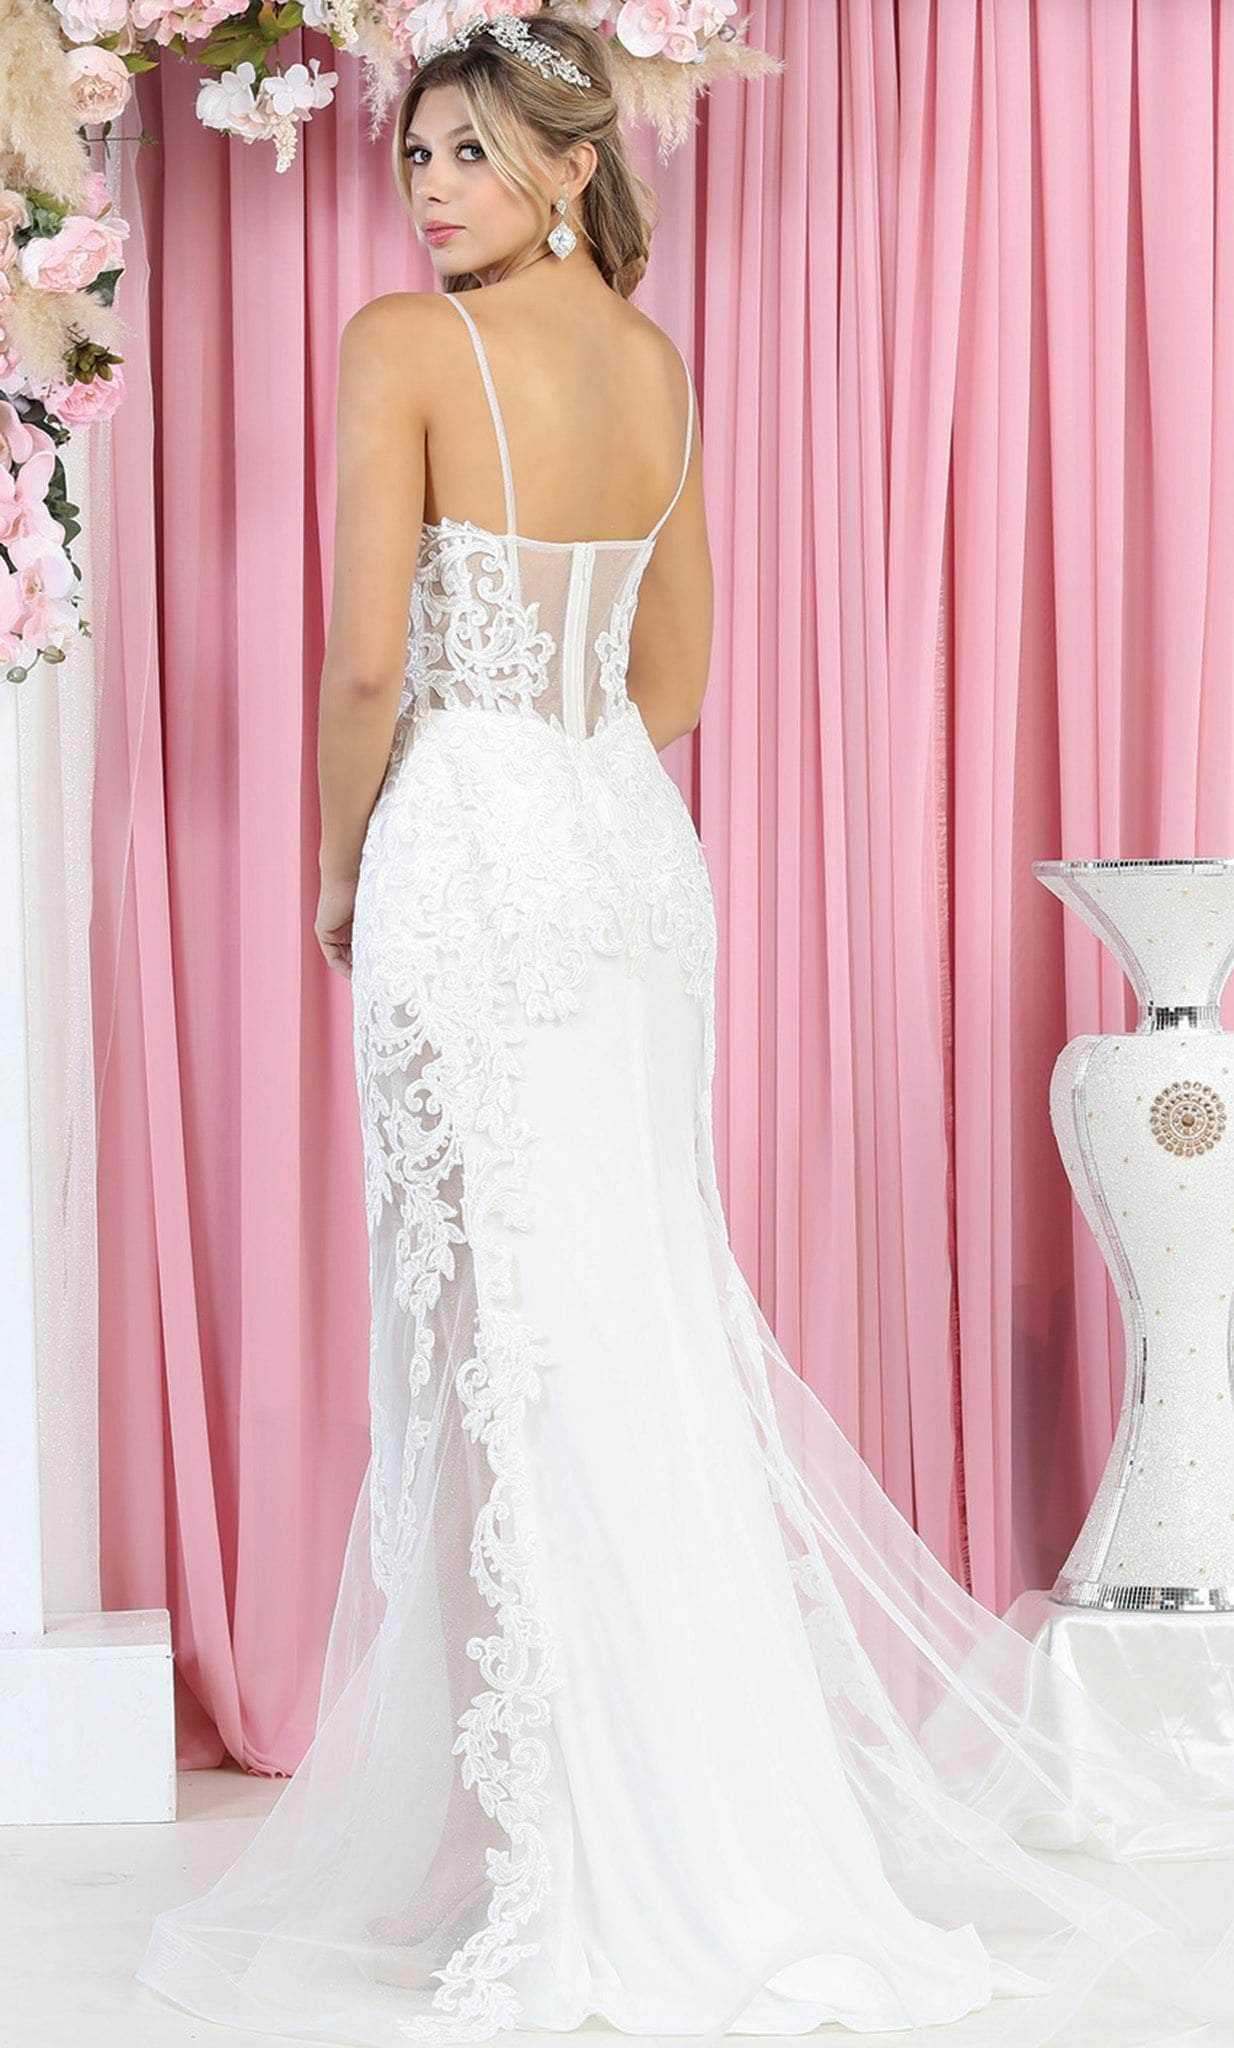 May Queen, May Queen RQ7919 - Embroidered Mermaid Wedding Gown